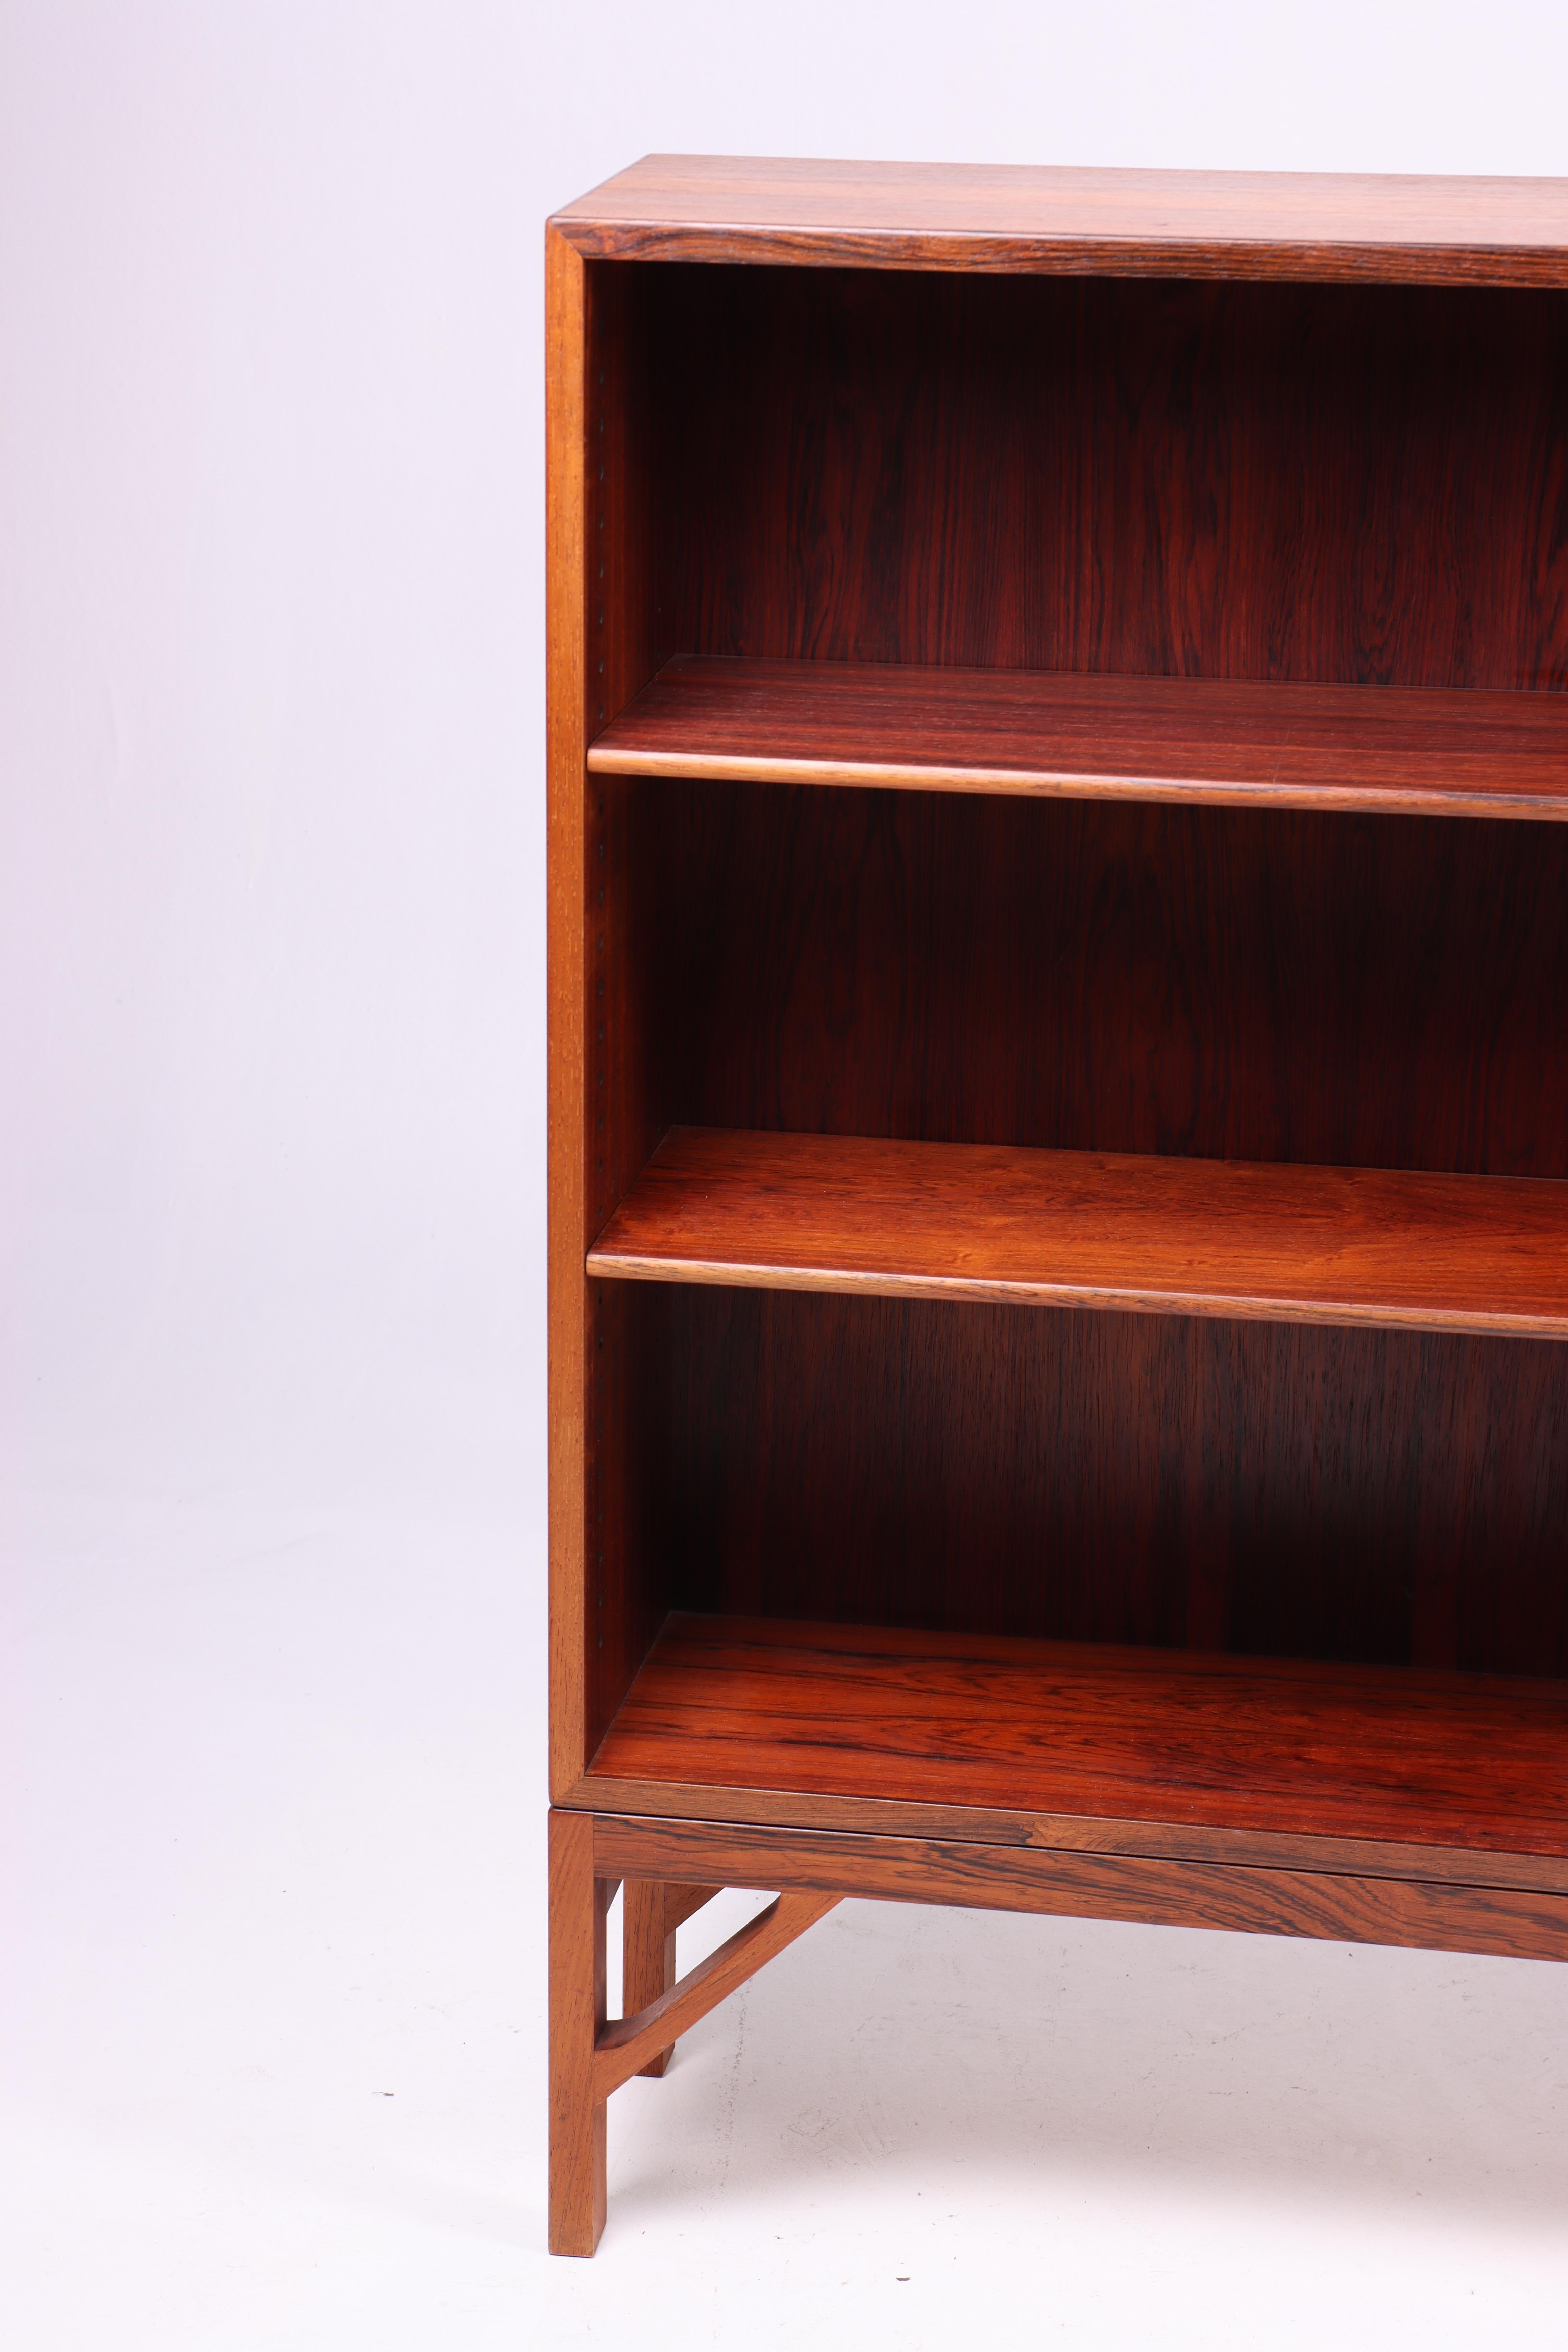 Scandinavian Modern Pair of China Bookcases in Rosewood by Børge Mogensen, Made in Denmark, 1960s For Sale